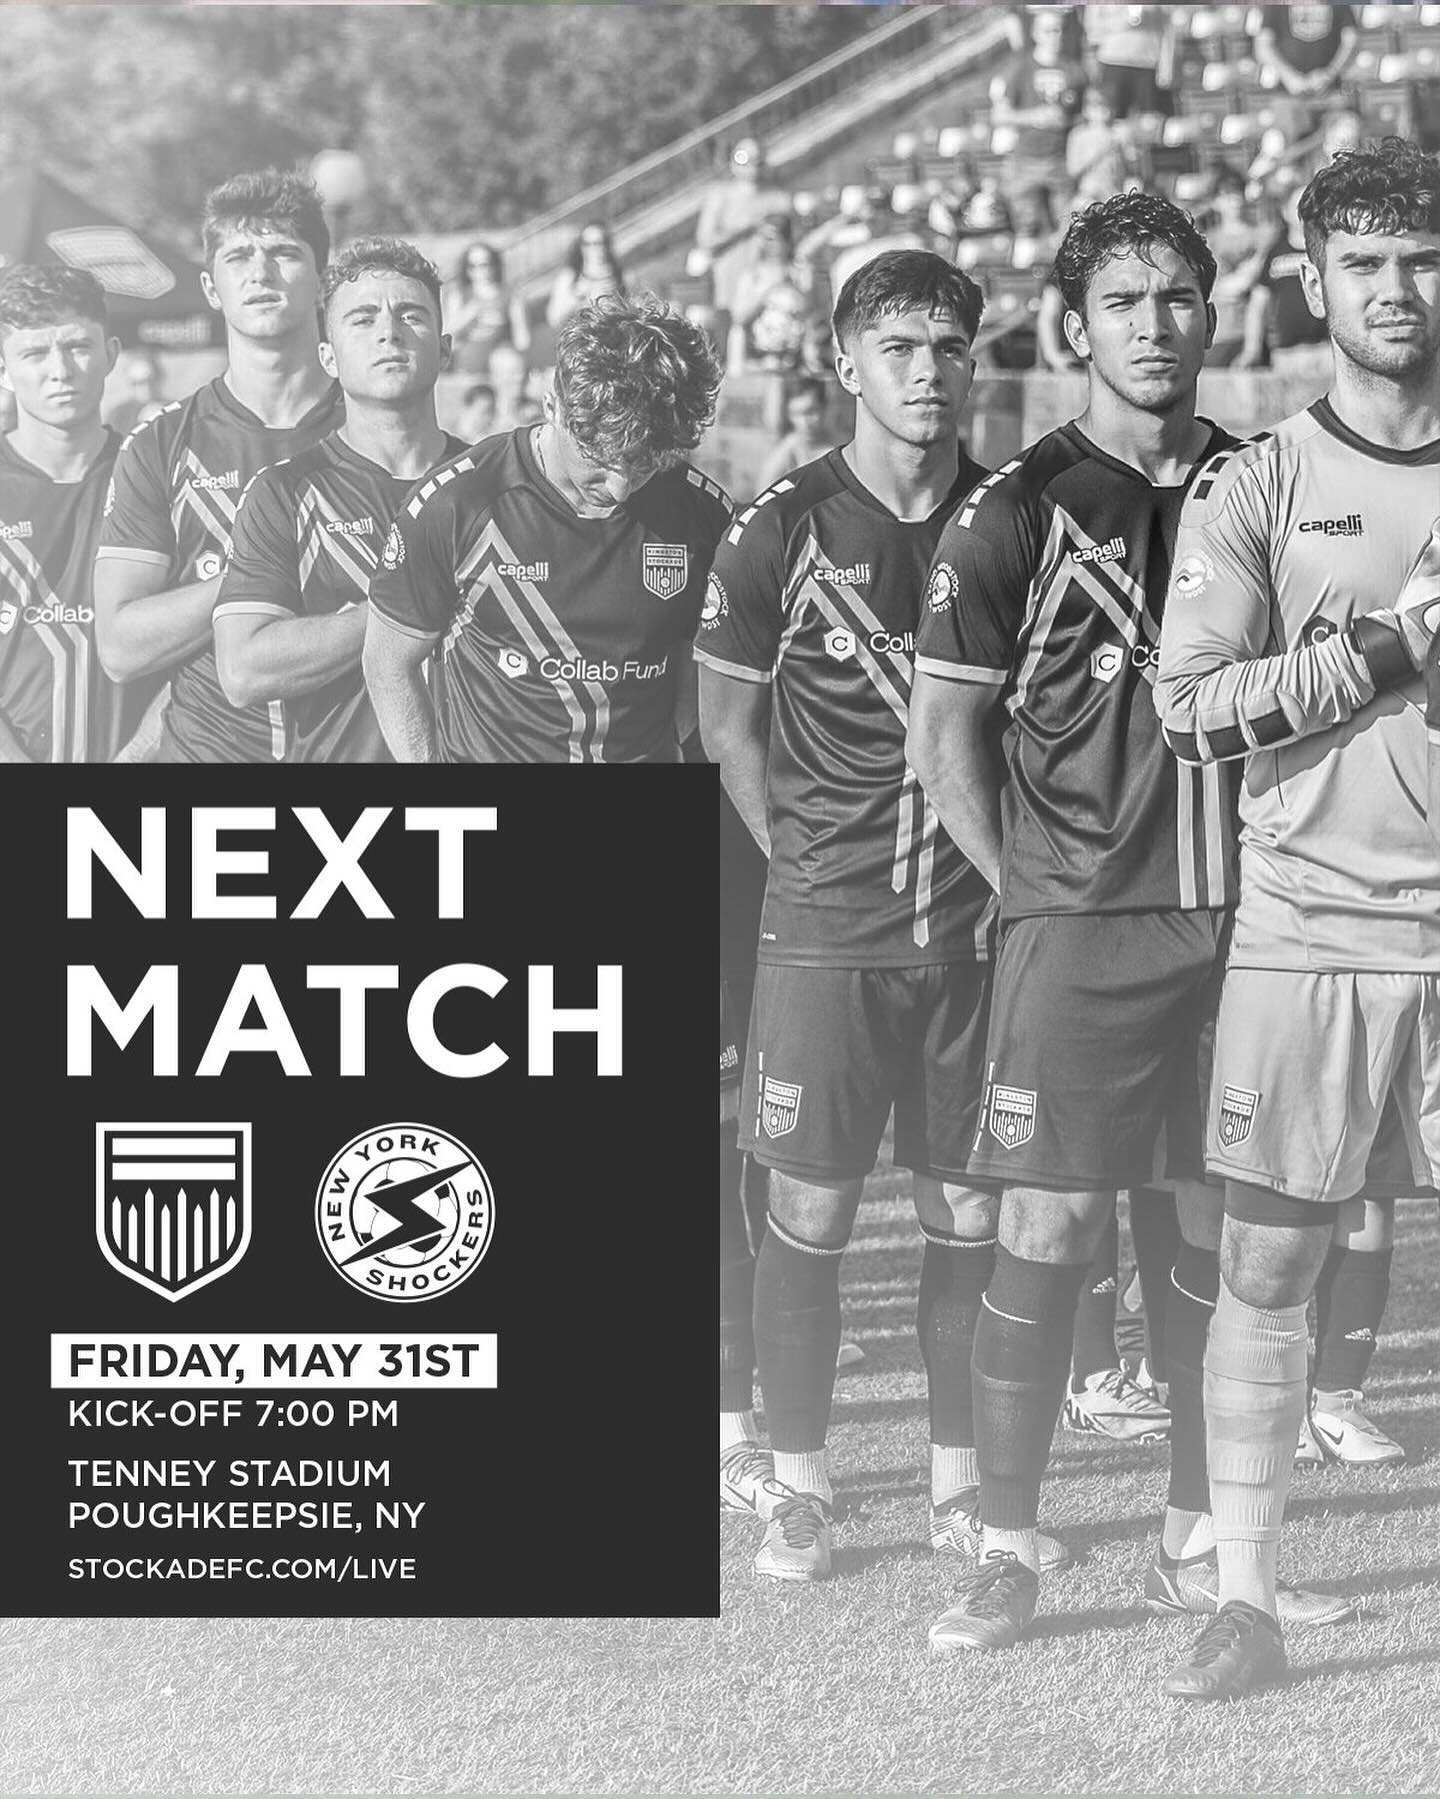 ⏭️ Next Up: Match Day 5 at Tenney!

We return to Tenney on Friday night as New York Shockers travel south for an important match-up! Tickets on sale now at stockadefc.com/tickets 

📆 Friday May 31st
⏰ 7PM
🆚 NY Shockers
🏟️Tenney Stadium (Marist Col